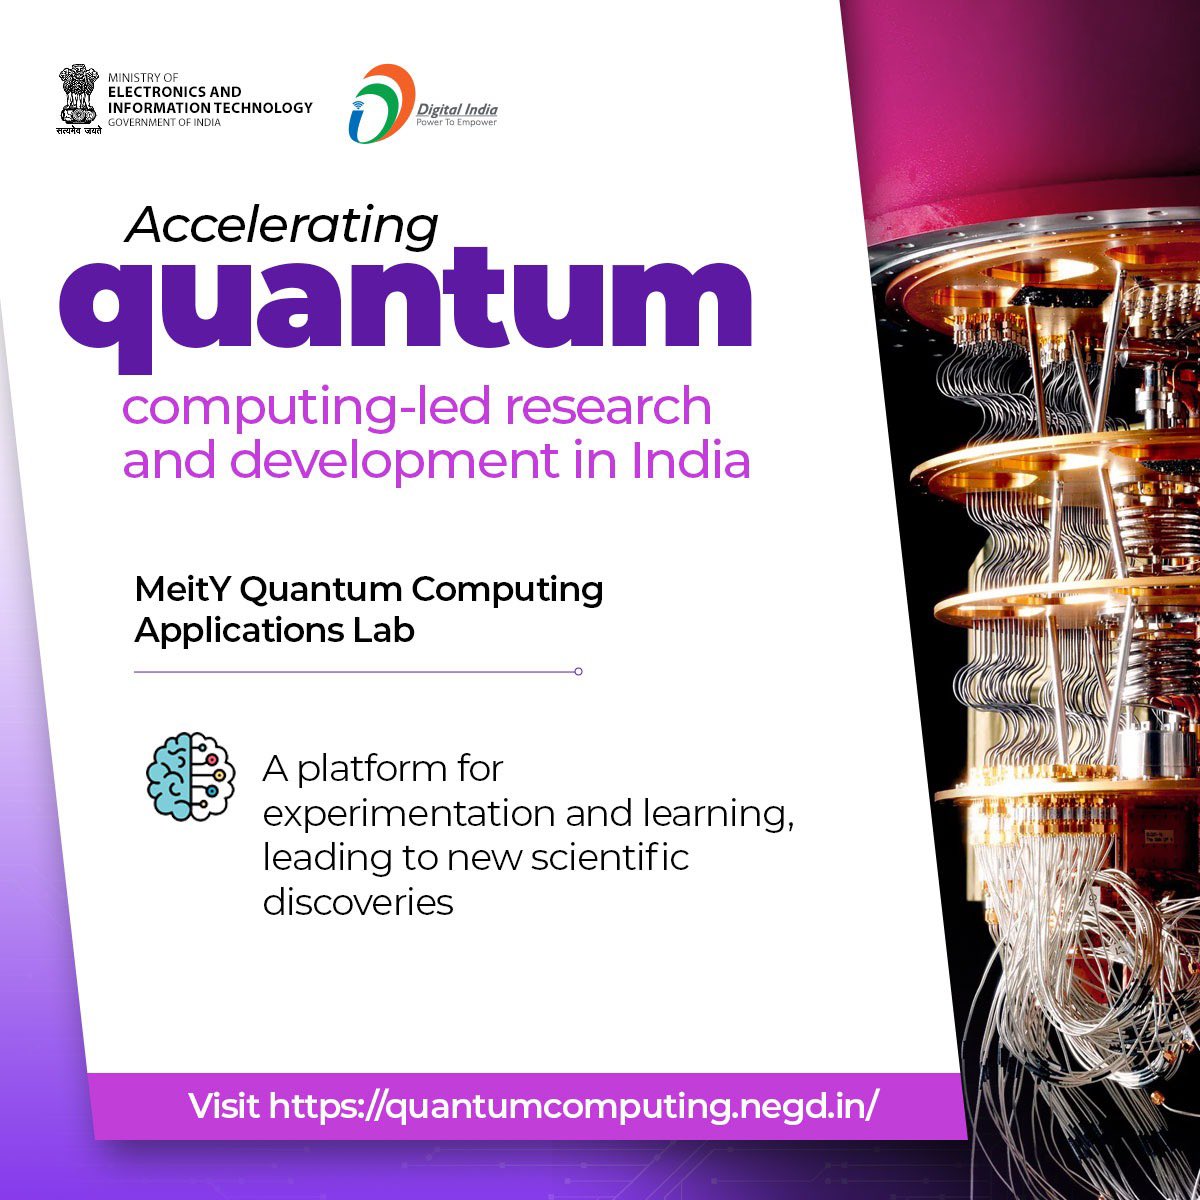 The MeitY Quantum Computing Applications Lab focuses on the application development side of #QuantumComputing - develop quantum algorithms by offering the research community a platform for experimentation. Visit quantumcomputing.negd.in #DigitalIndia